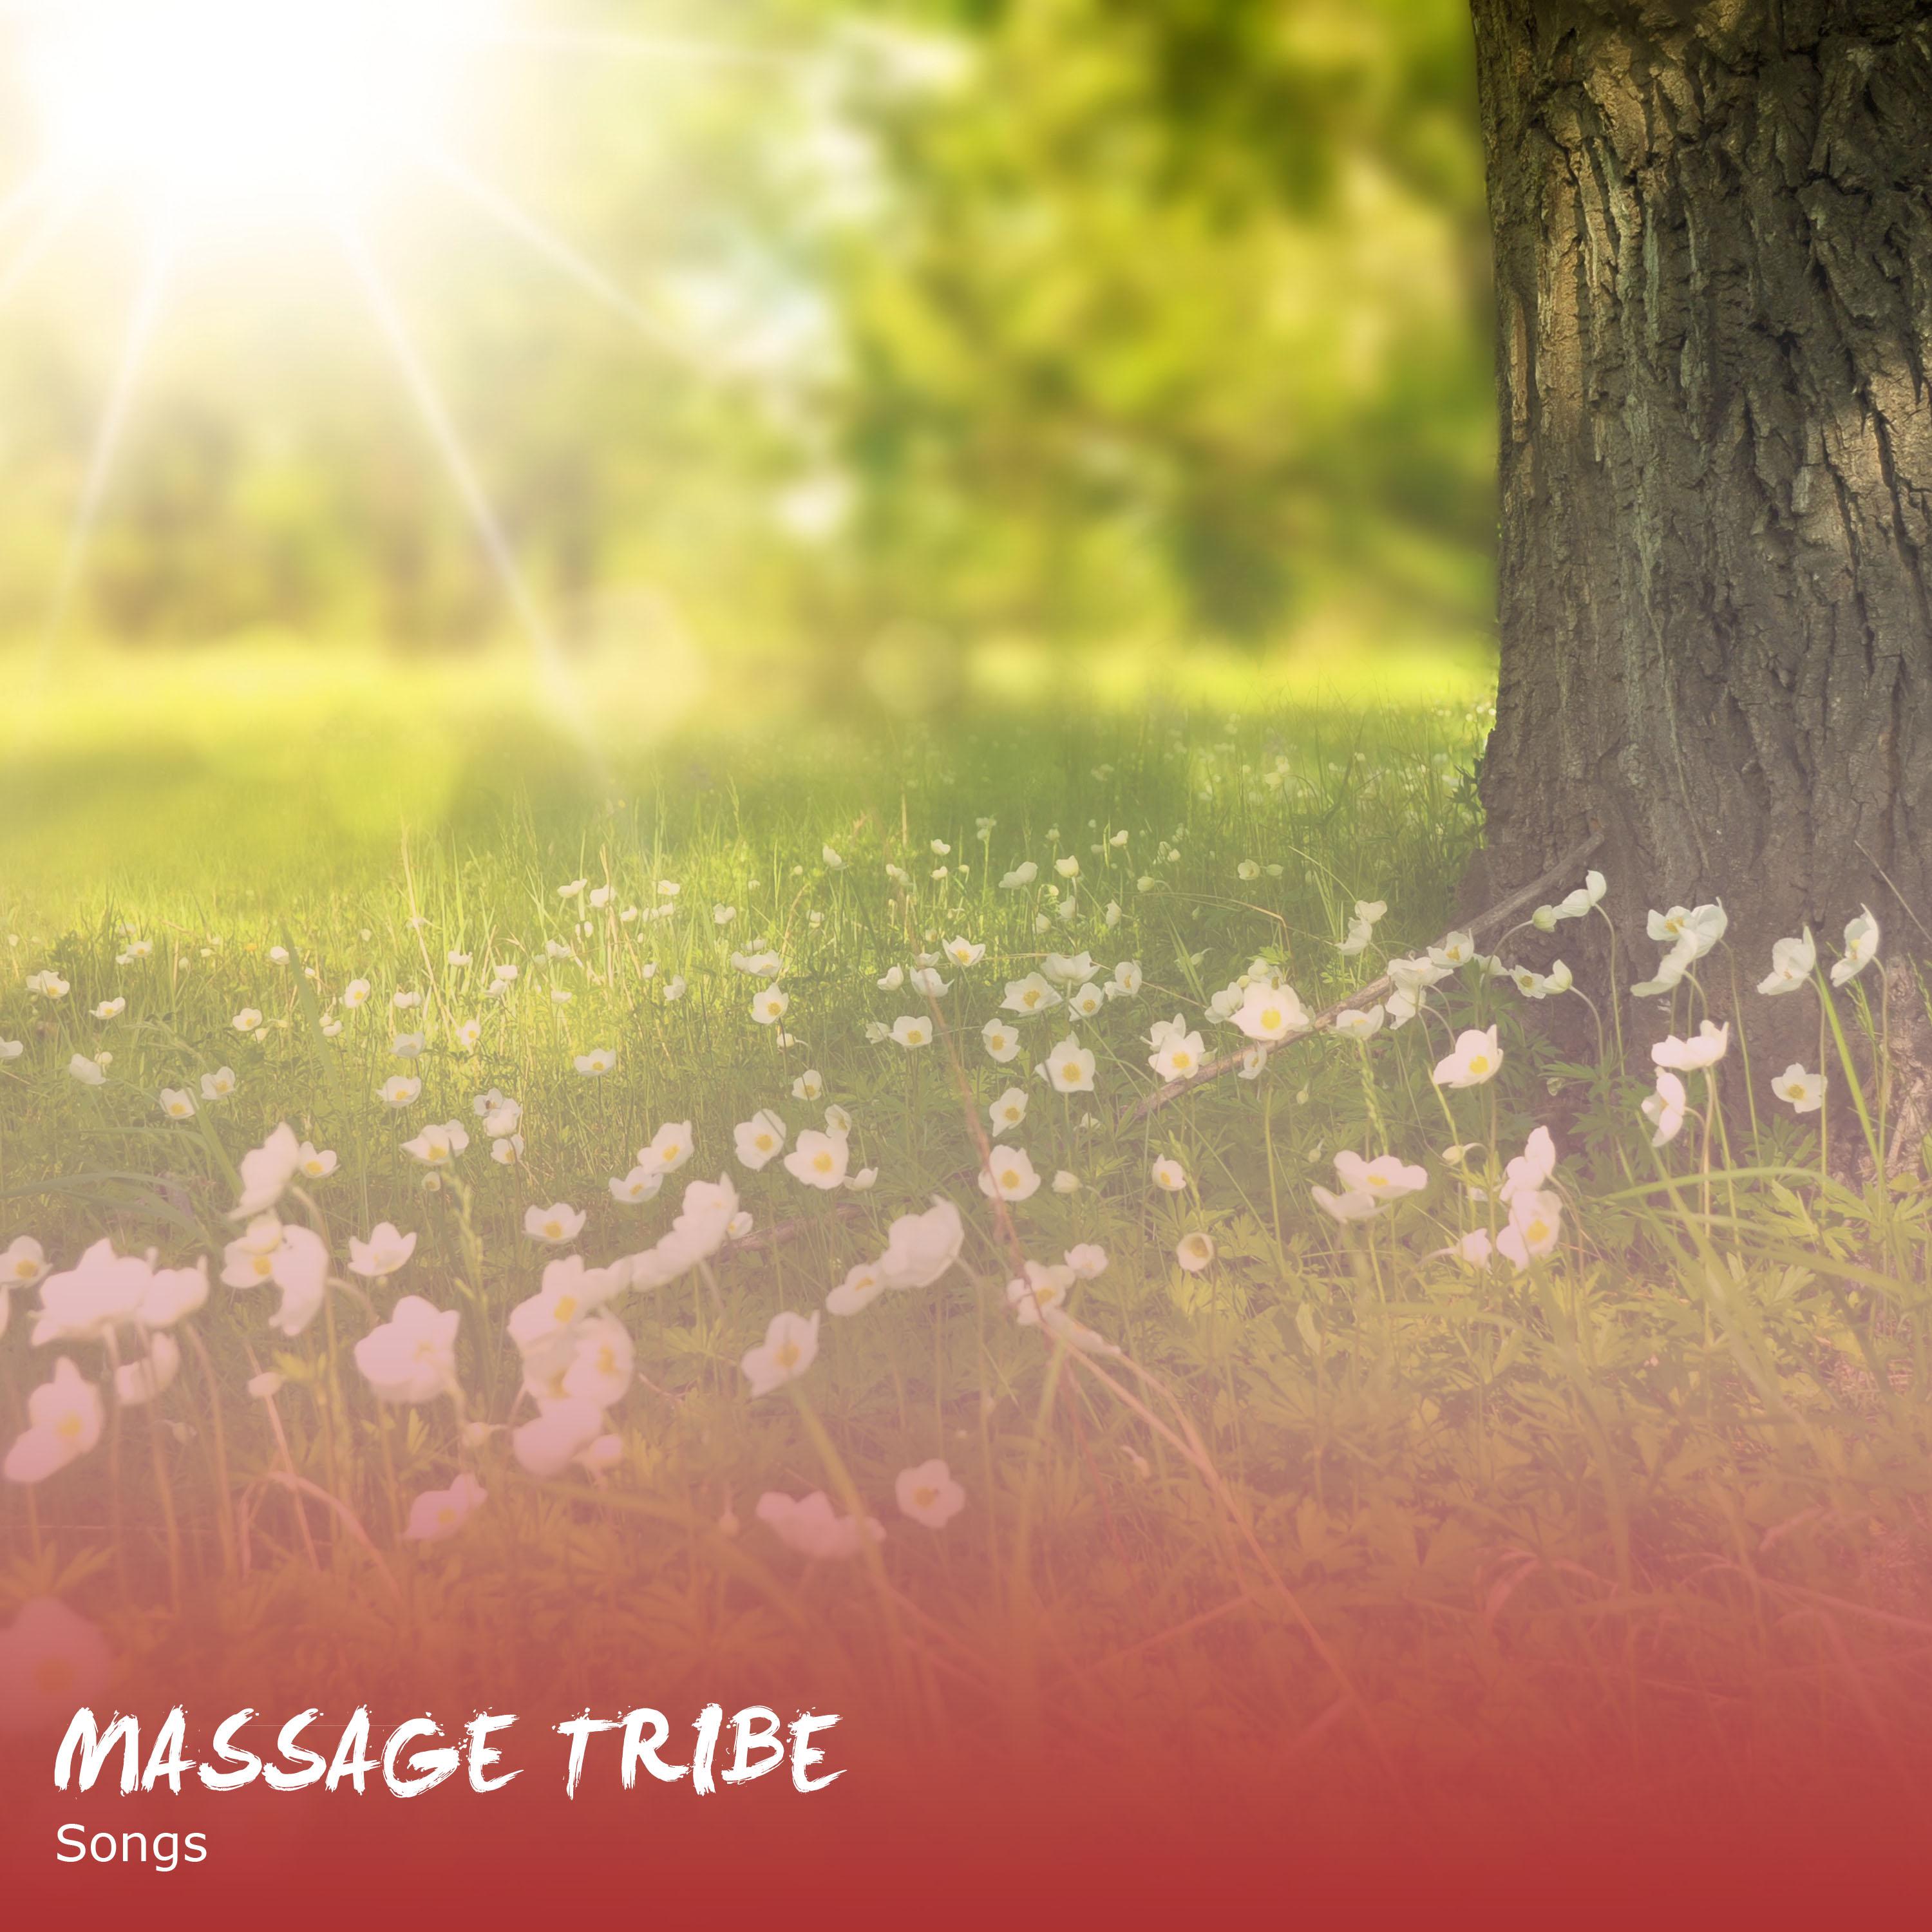 12 Massage Tribe Songs